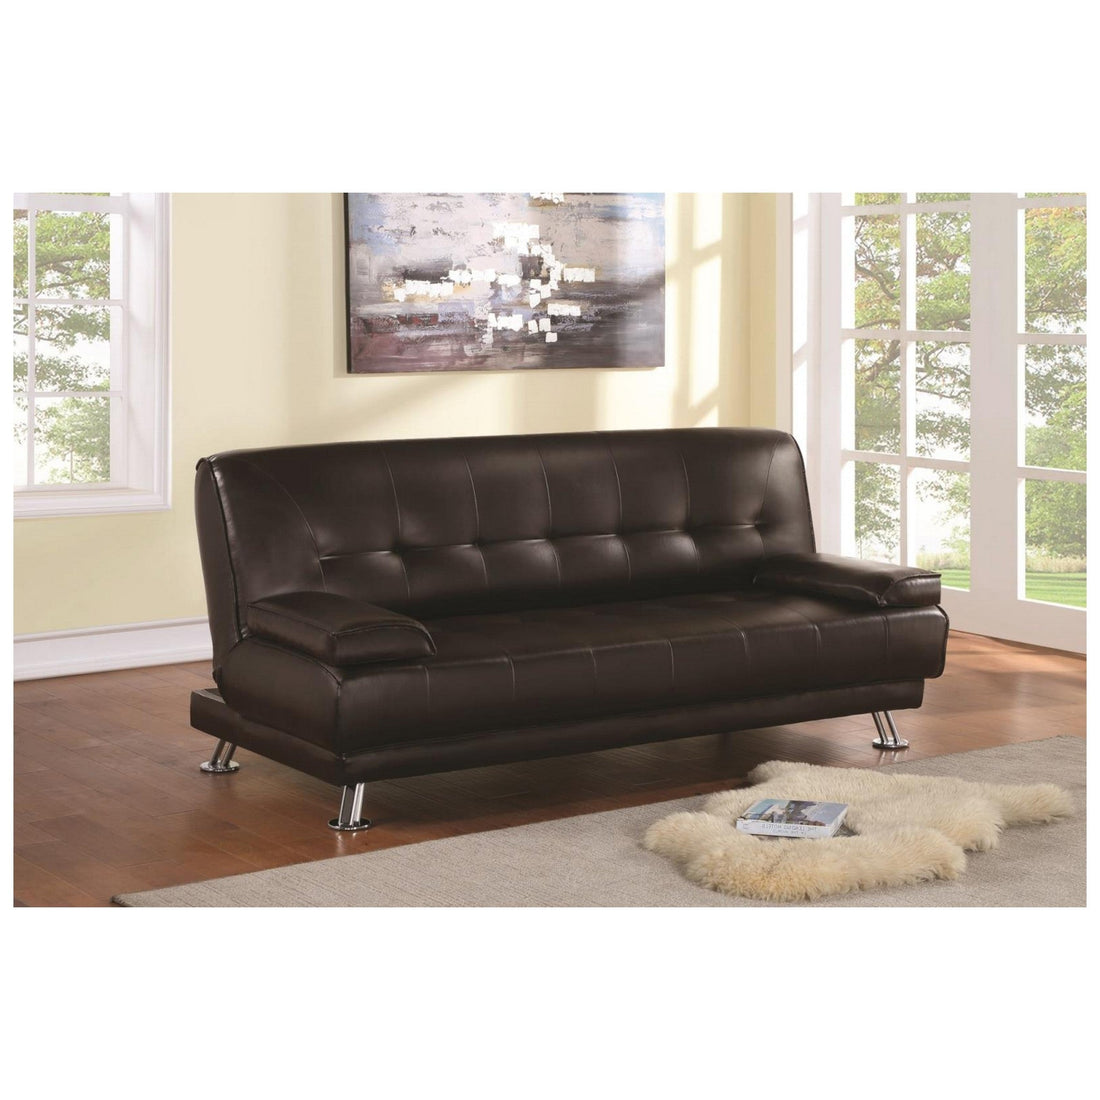 Pierre Tufted Upholstered Sofa Bed Brown 300148